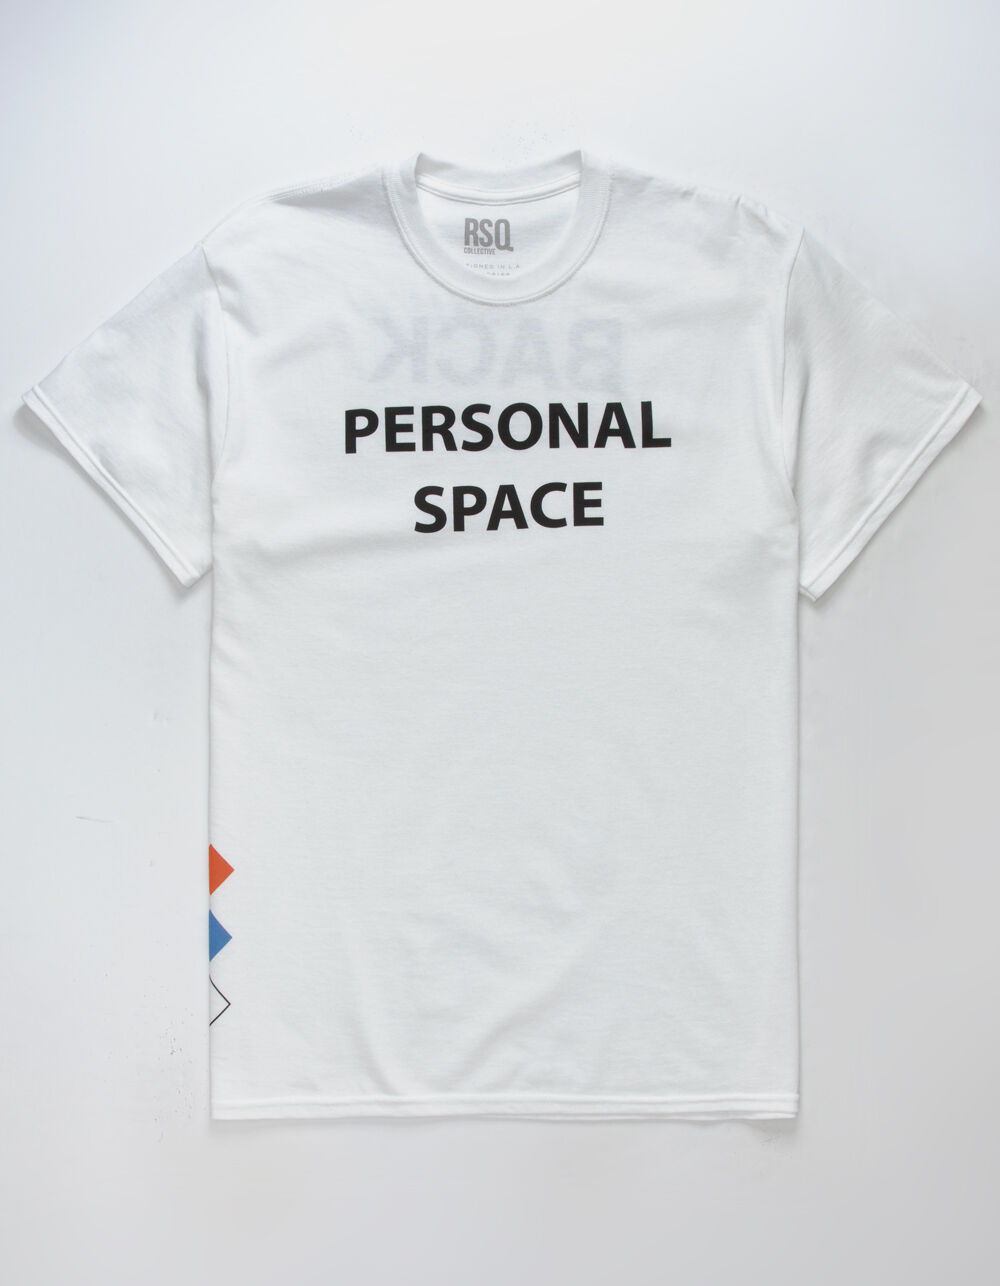 RSQ Personal Space Mens T-Shirt image number 0